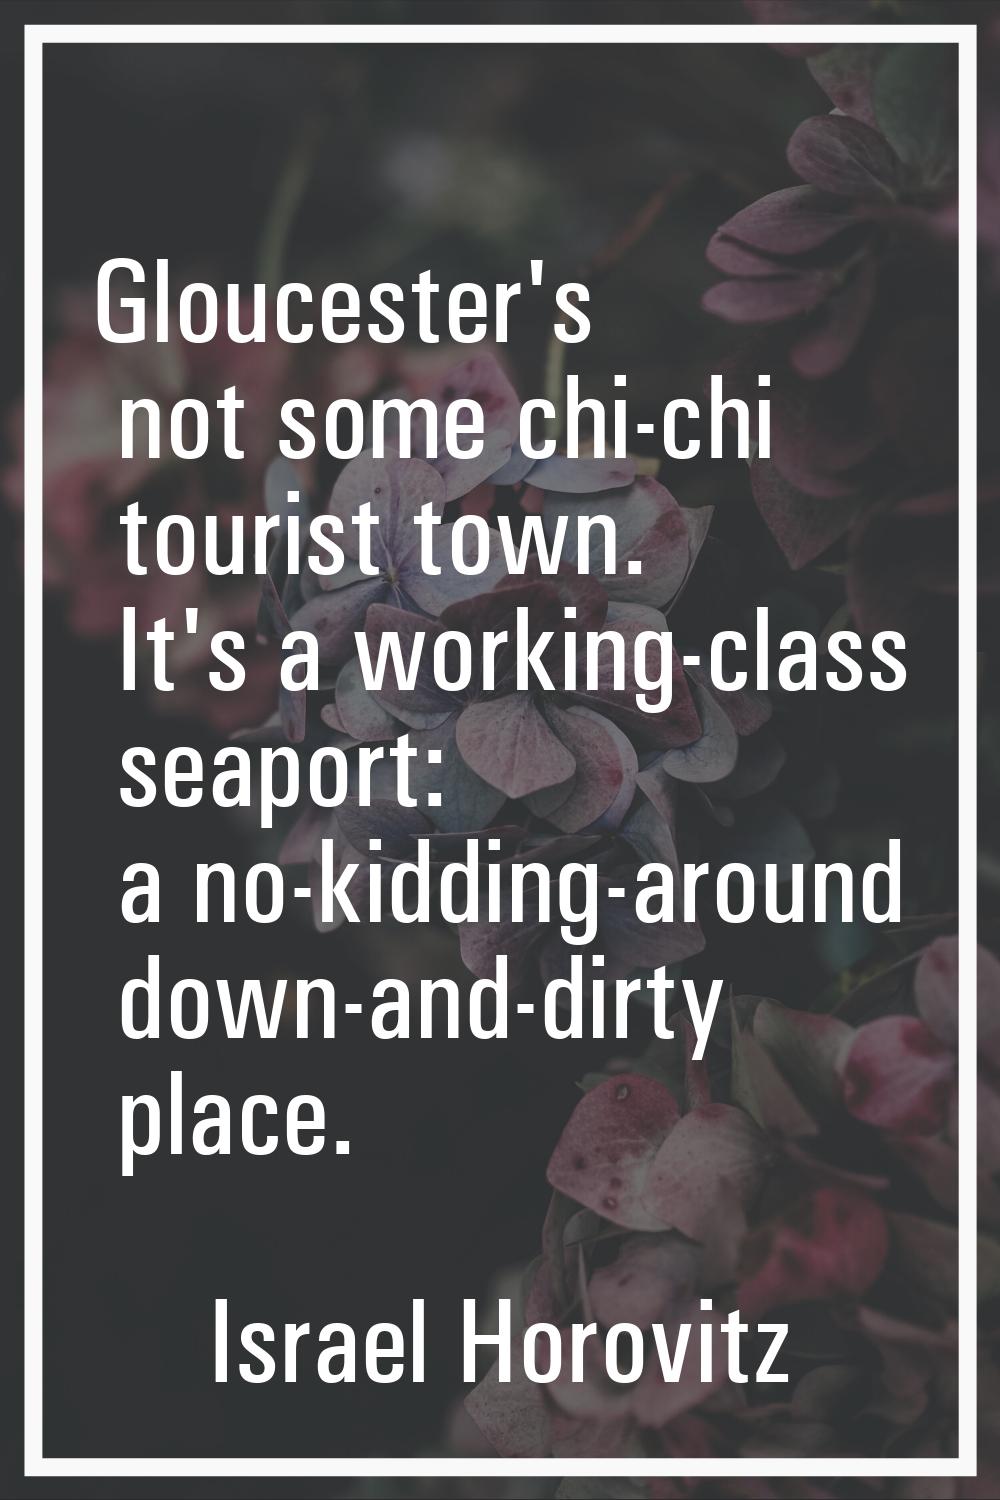 Gloucester's not some chi-chi tourist town. It's a working-class seaport: a no-kidding-around down-